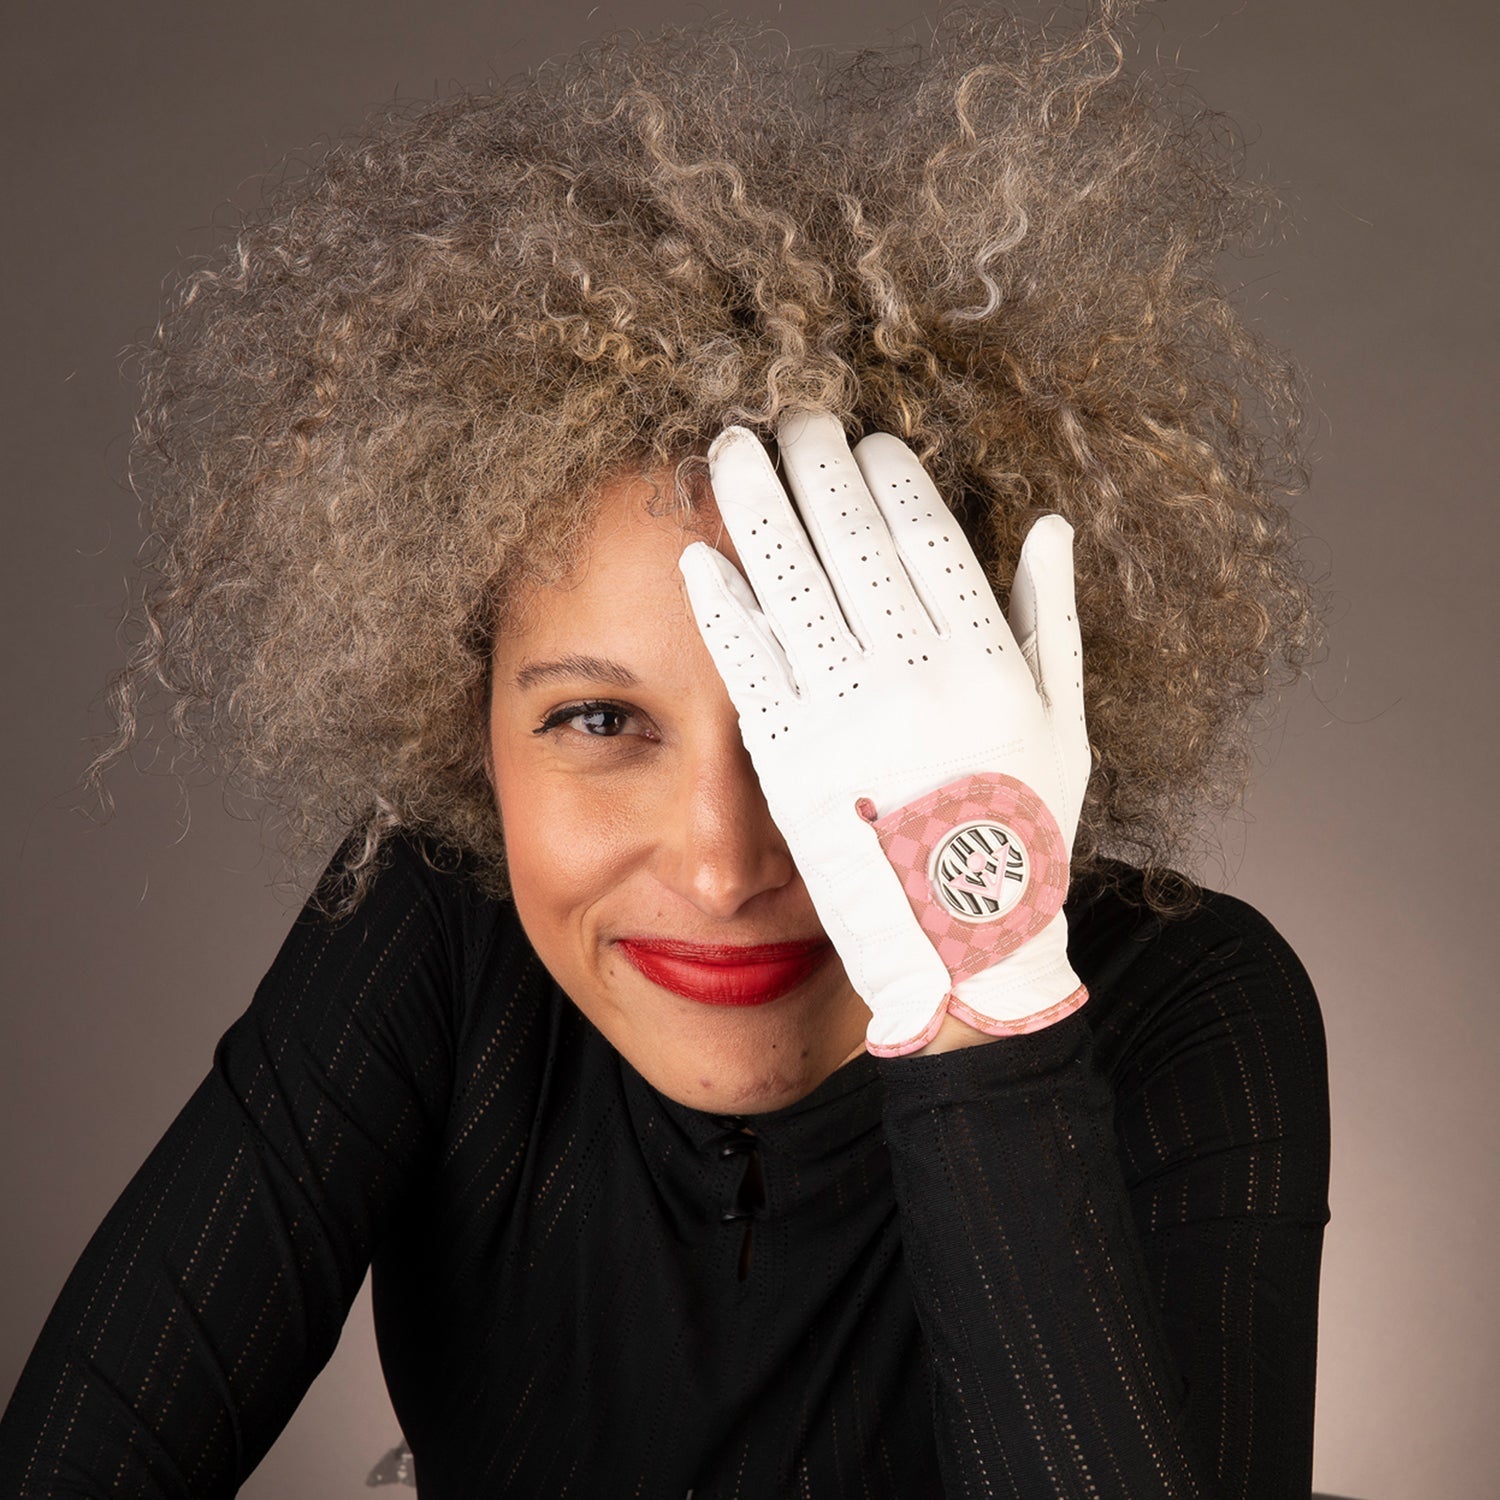 Woman with curly hair smiling at the camera, wearing a white leather golf glove with a pink and black emblem on the back, displayed on her raised hand.